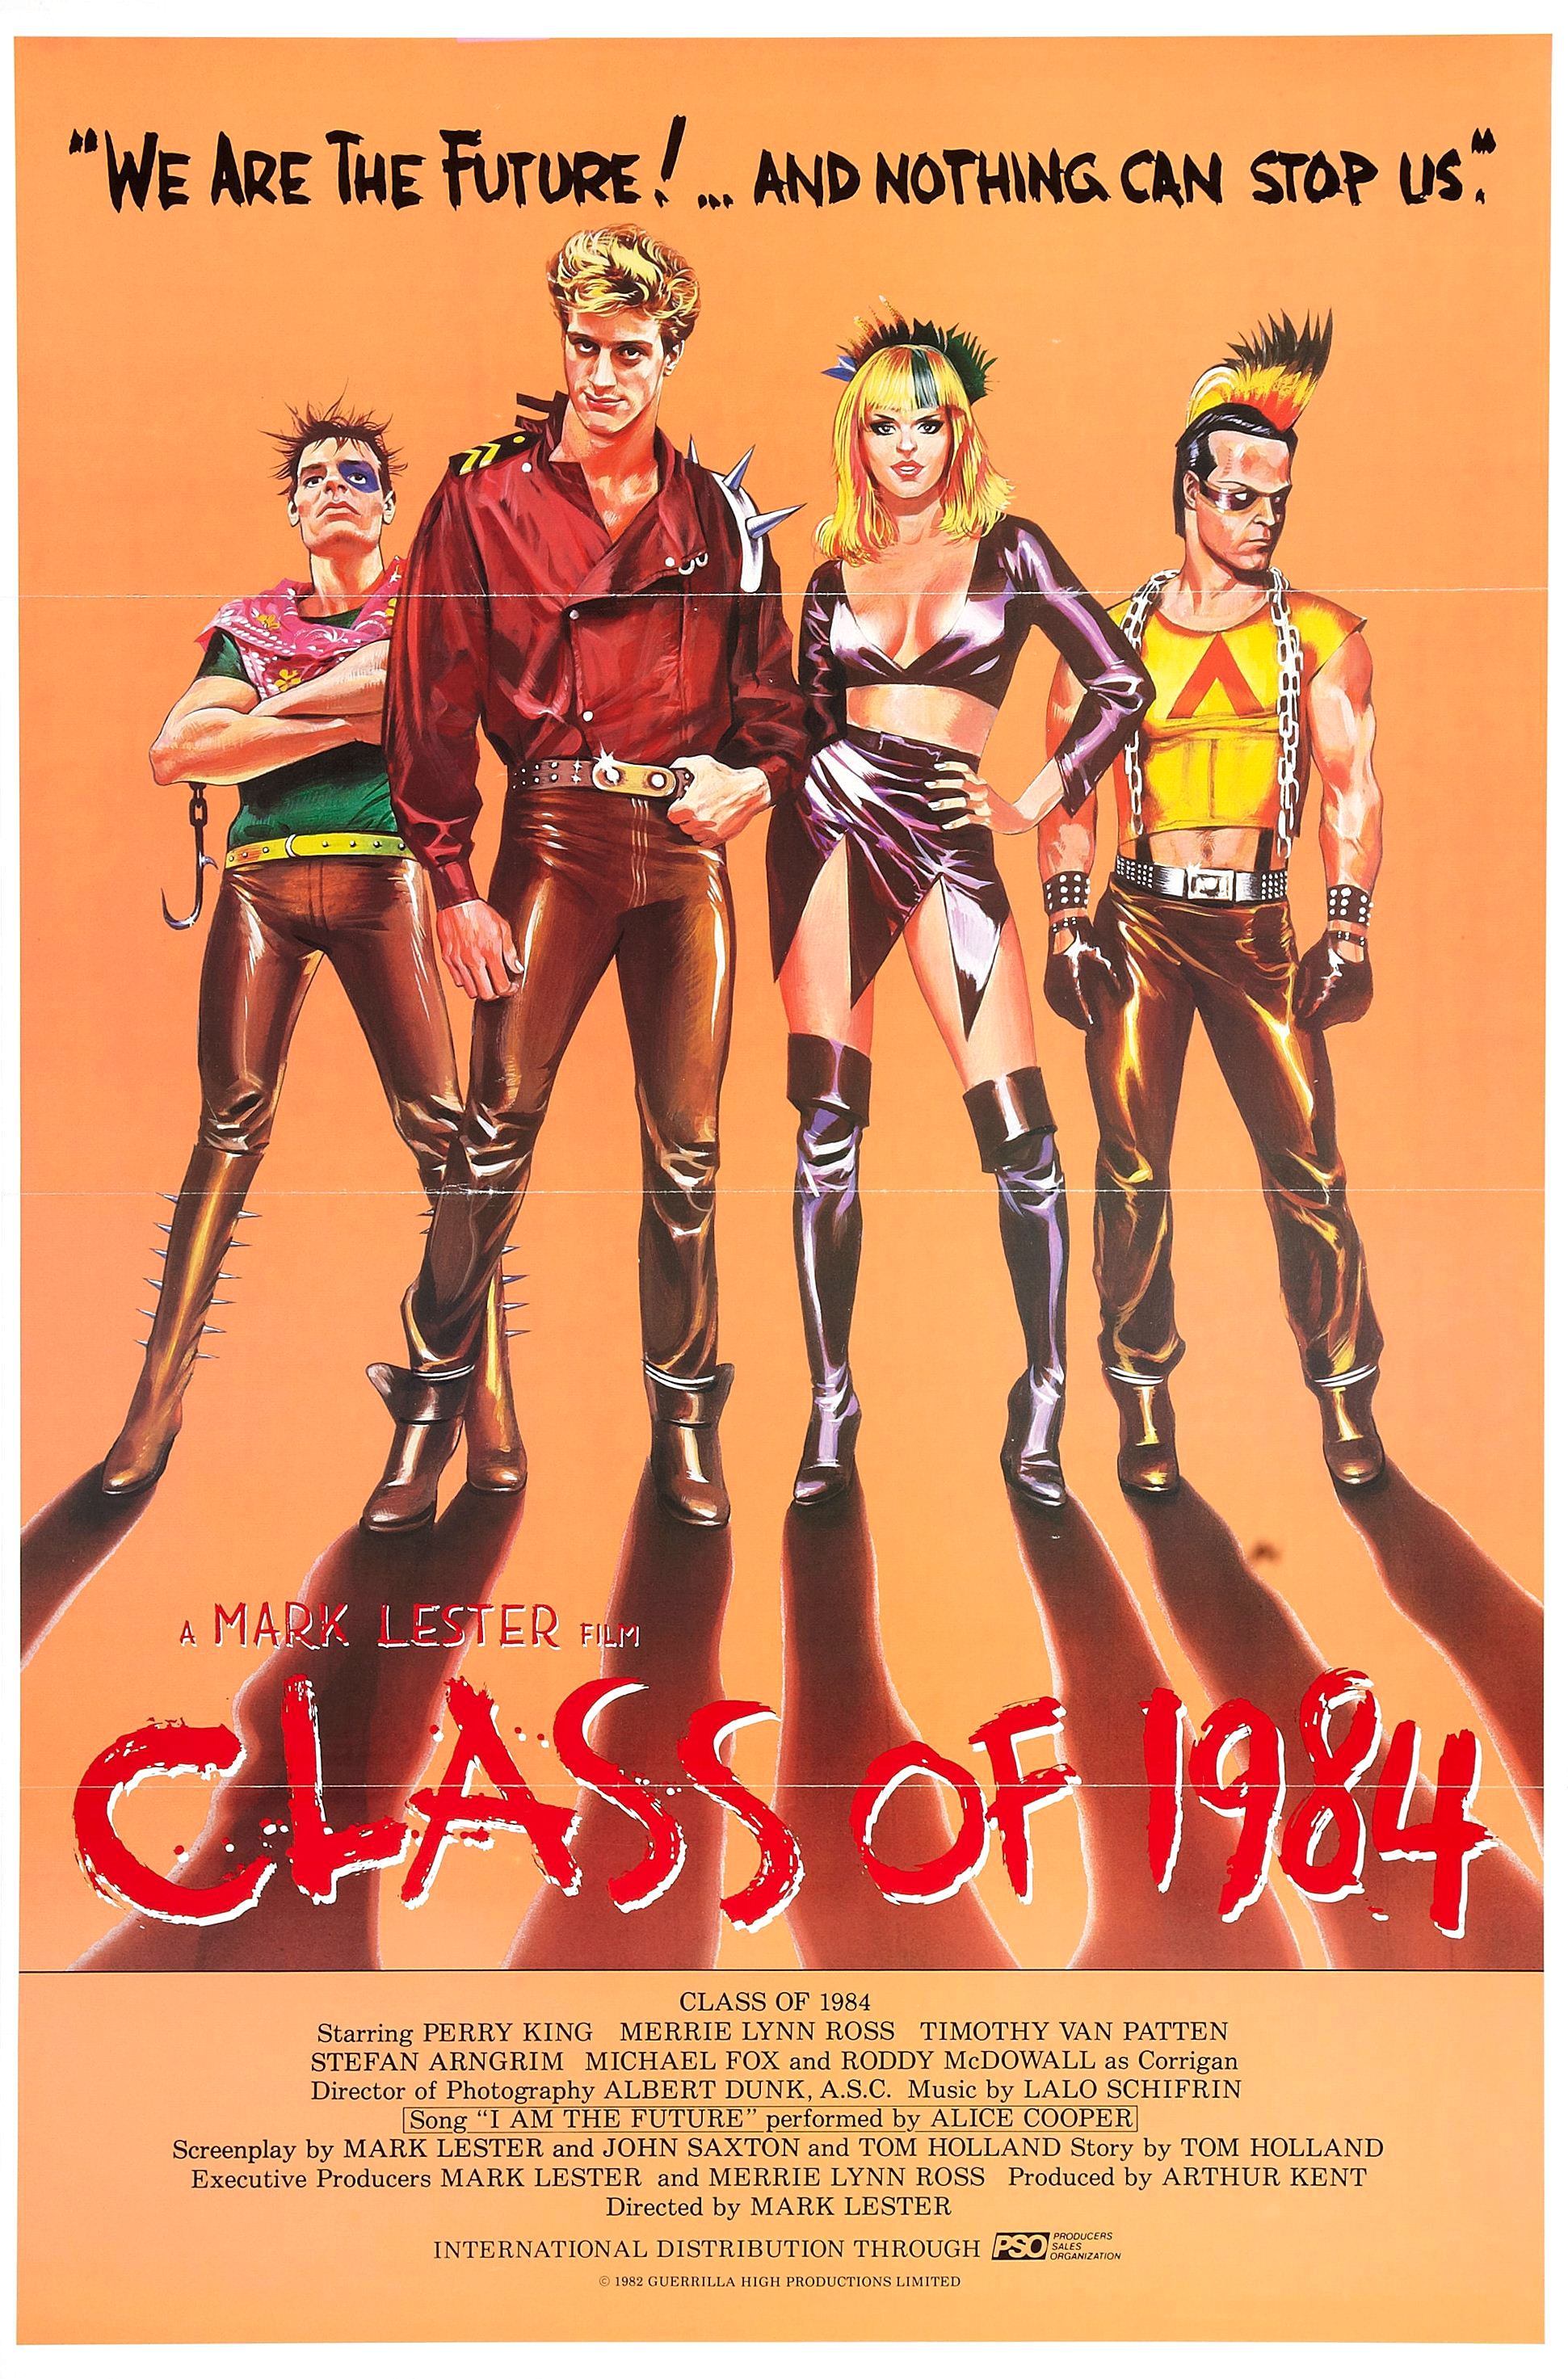 Movie Posters from the 80's